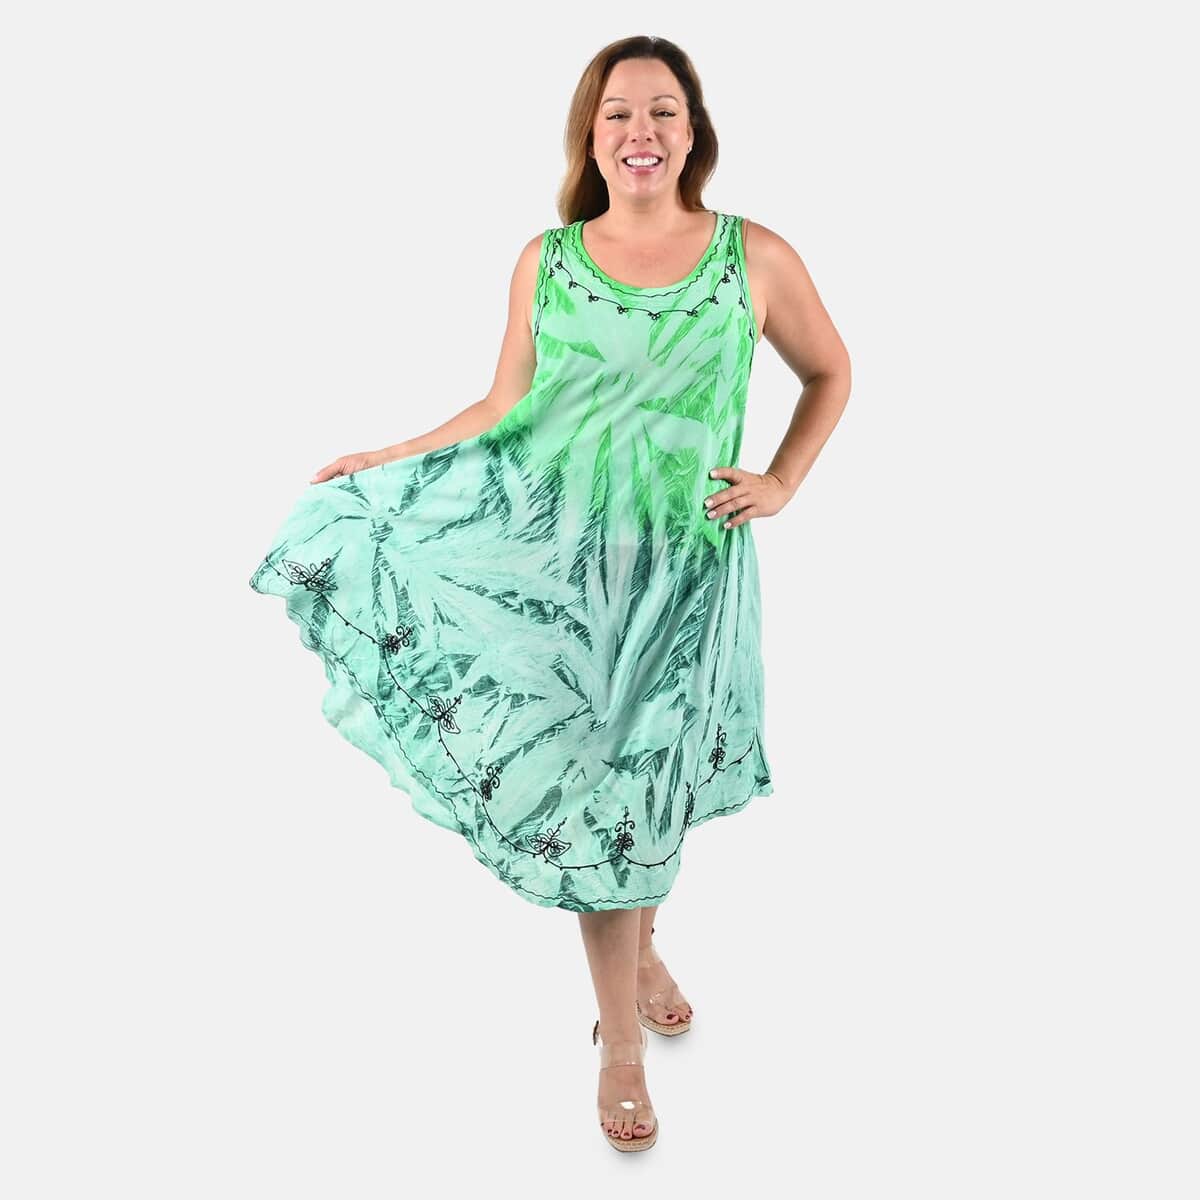 Tamsy Mint Green and Turquoise Embroidered Tie Dye Umbrella Dress - One Size Plus | Women's Dress | Summer Dress | Western Dress | Sleeveless Dress image number 0